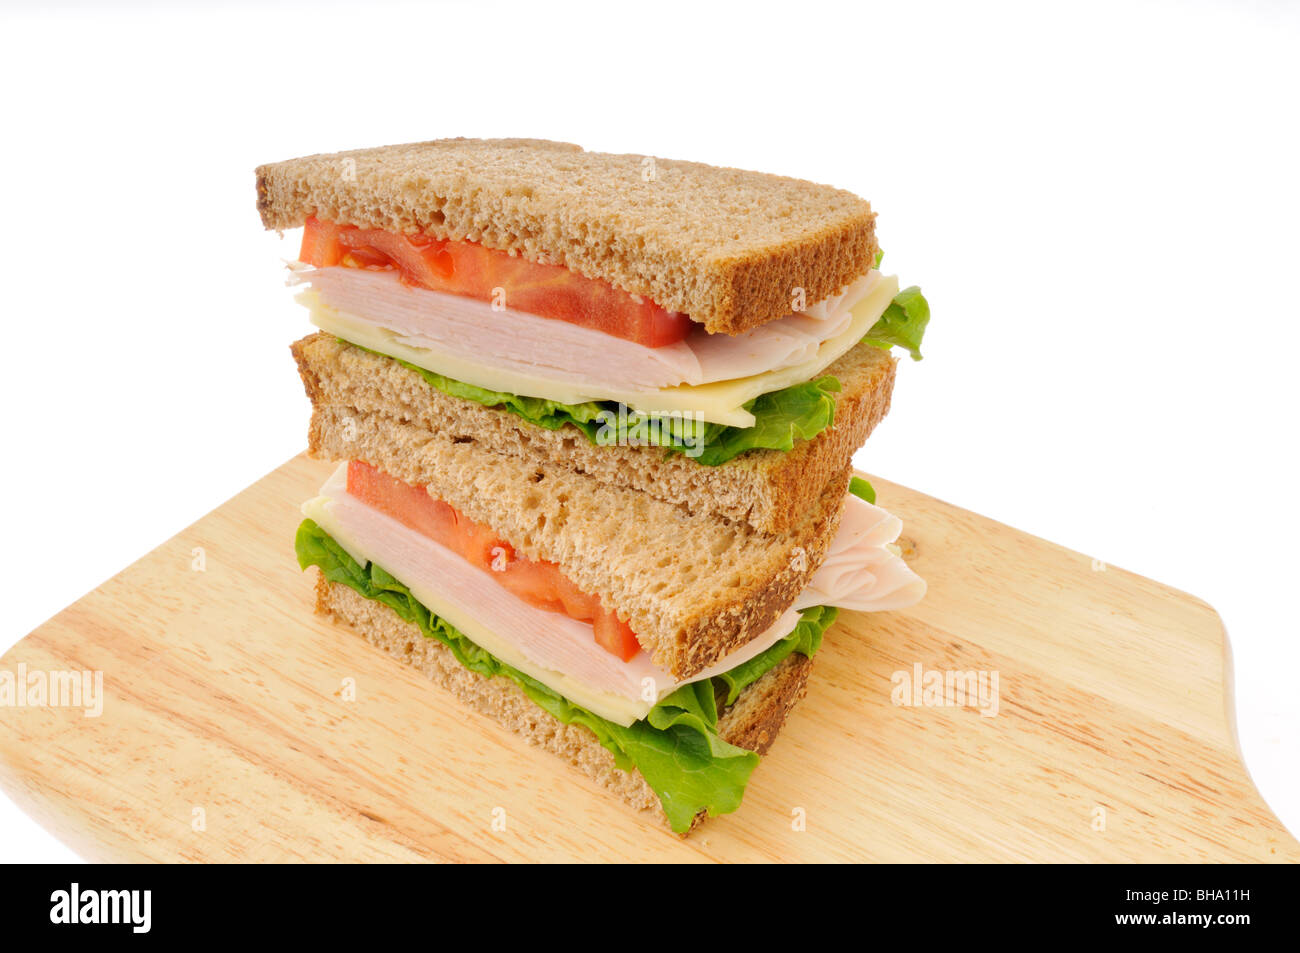 2 halves of turkey and cheese sandwich with lettuce and tomato on whole wheat bread stacked on chopping board. Stock Photo